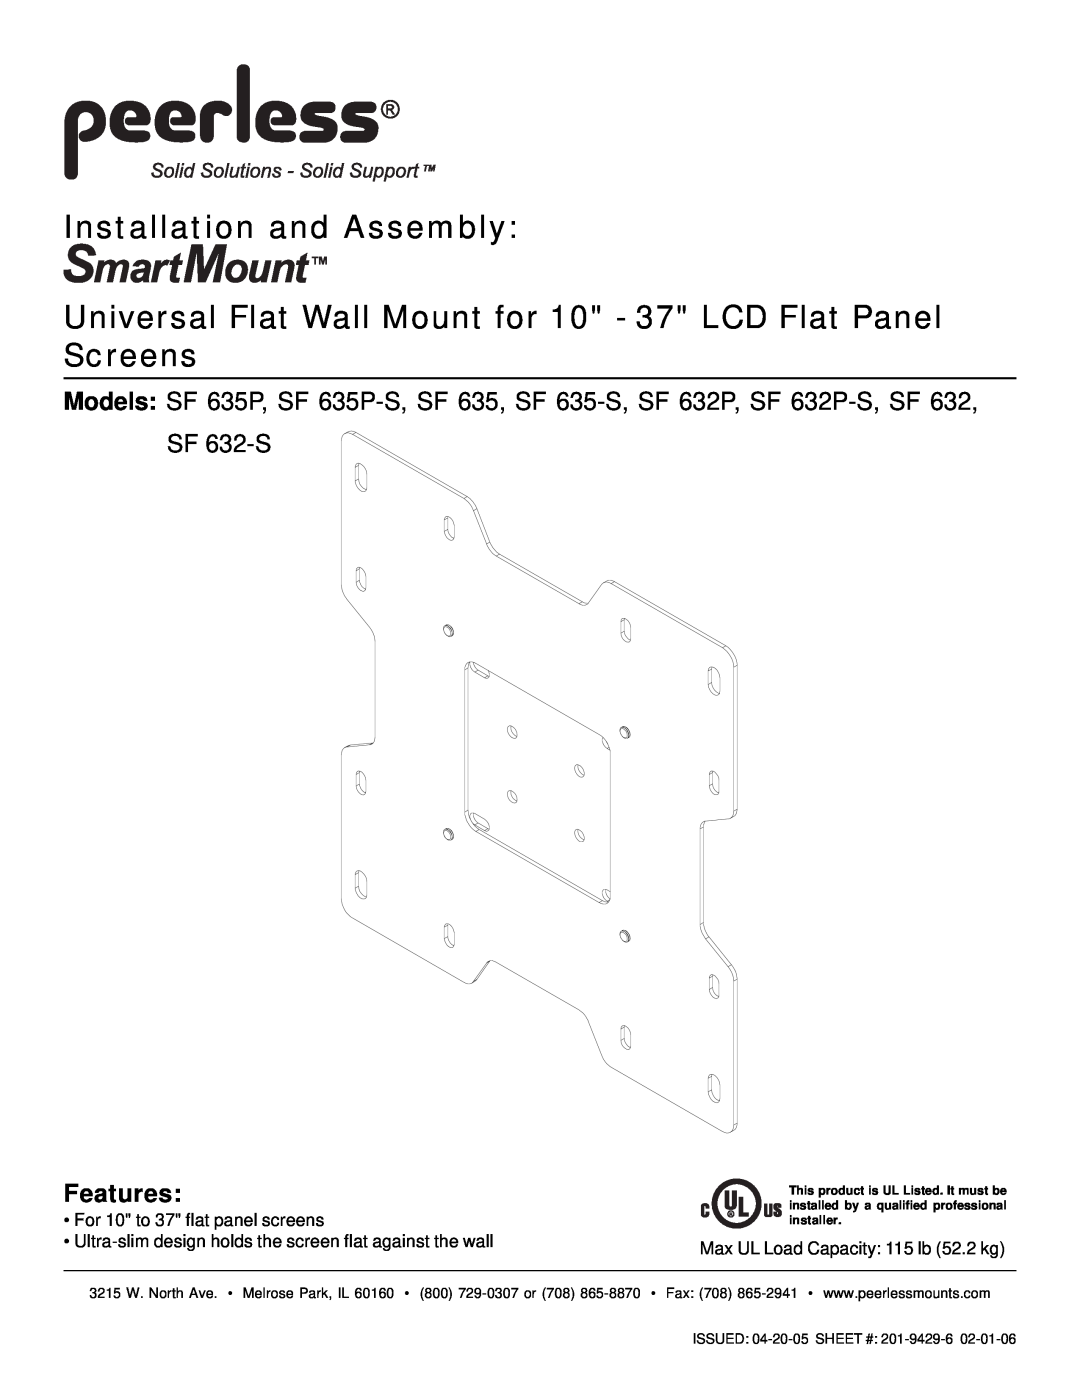 Peerless Industries SF 635P-S, SF 632P manual Features, Installation and Assembly, SF 632-S, ISSUED 04-20-05 SHEET # 